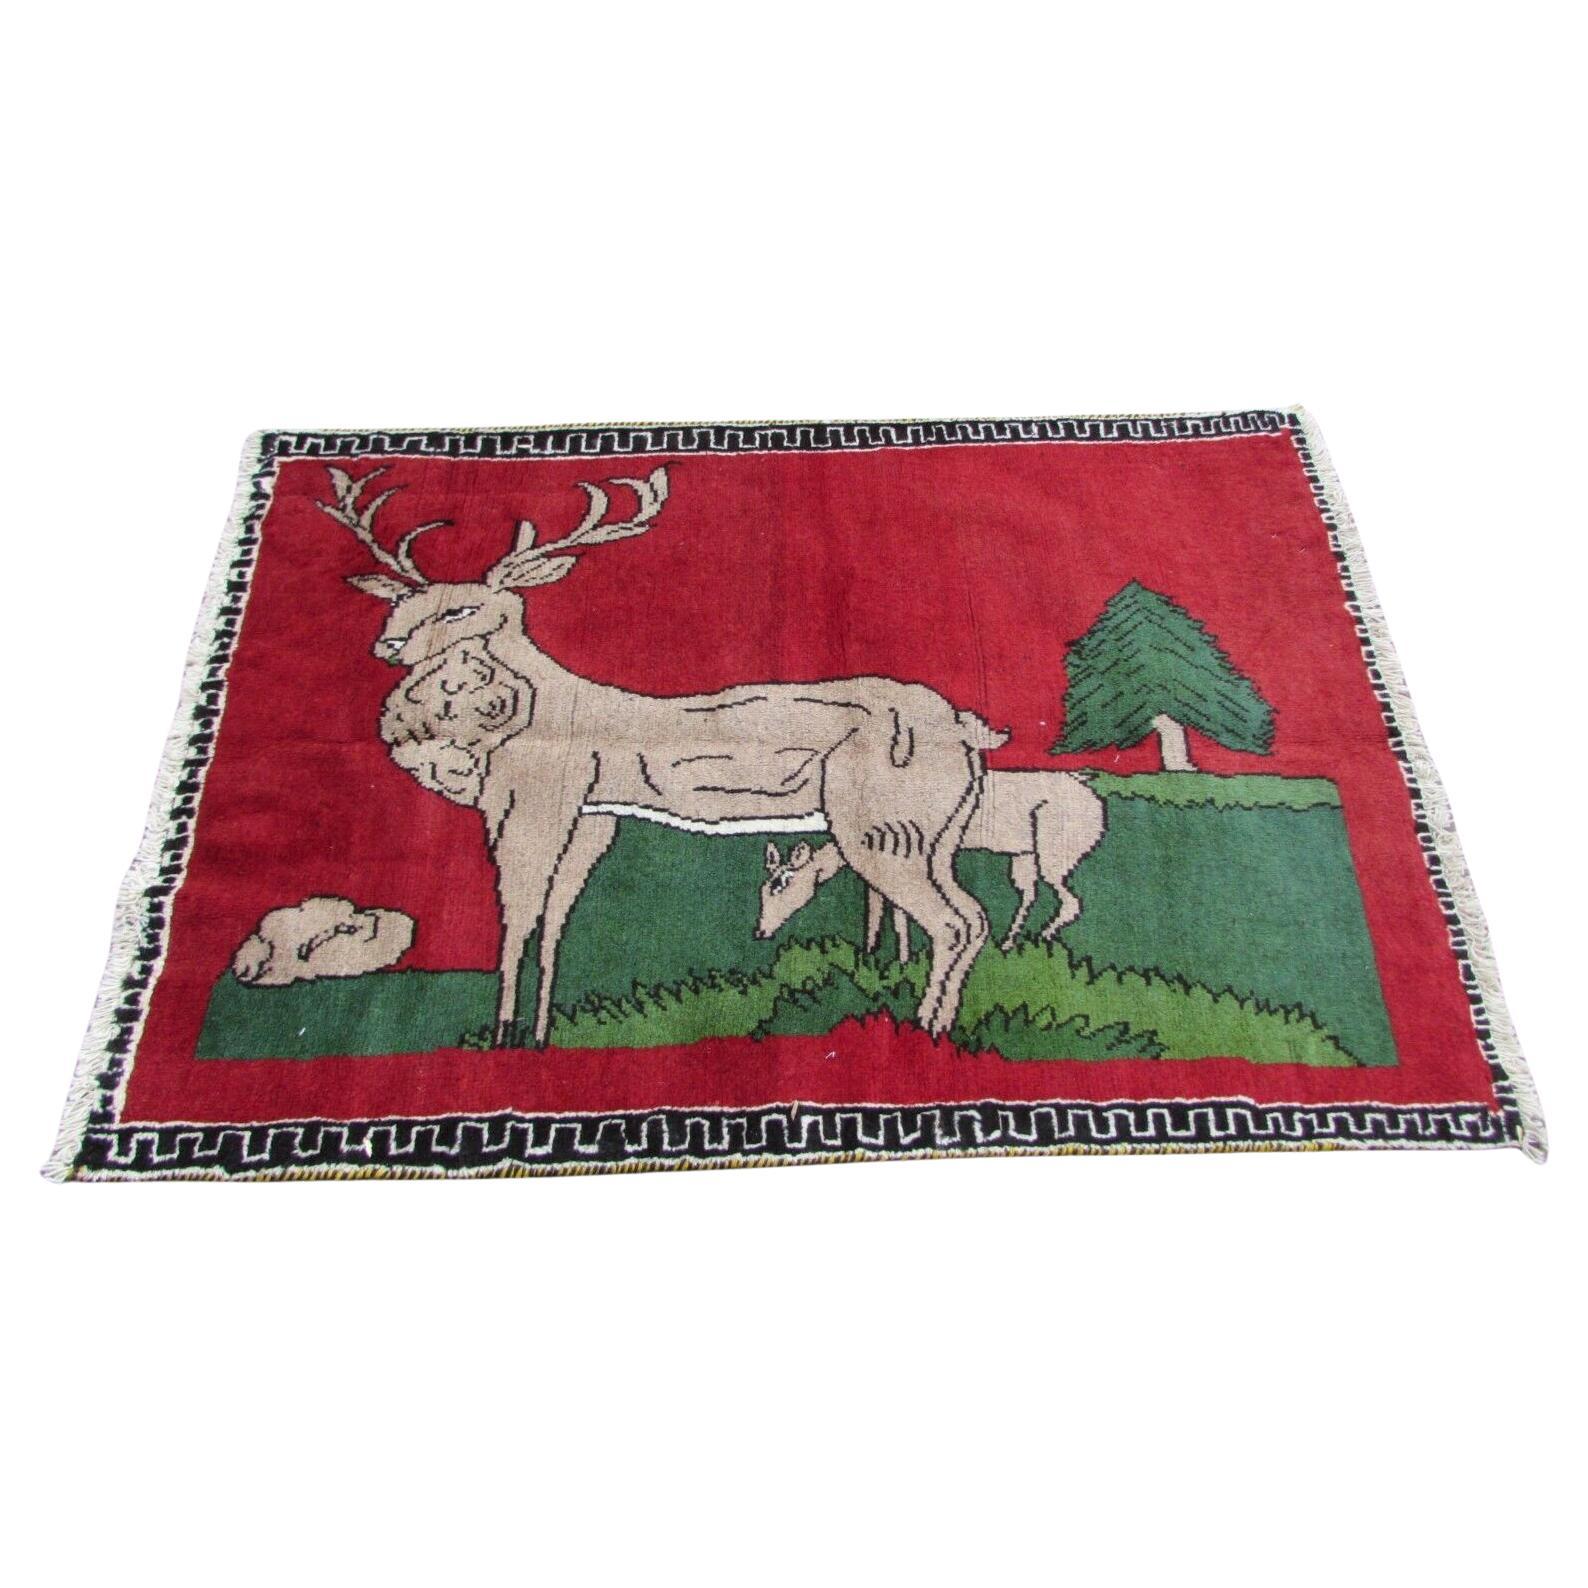 Handmade Vintage Persian Style Gabbeh Rug With Deer 2.6' x 4', 1970s - 1Q71 For Sale